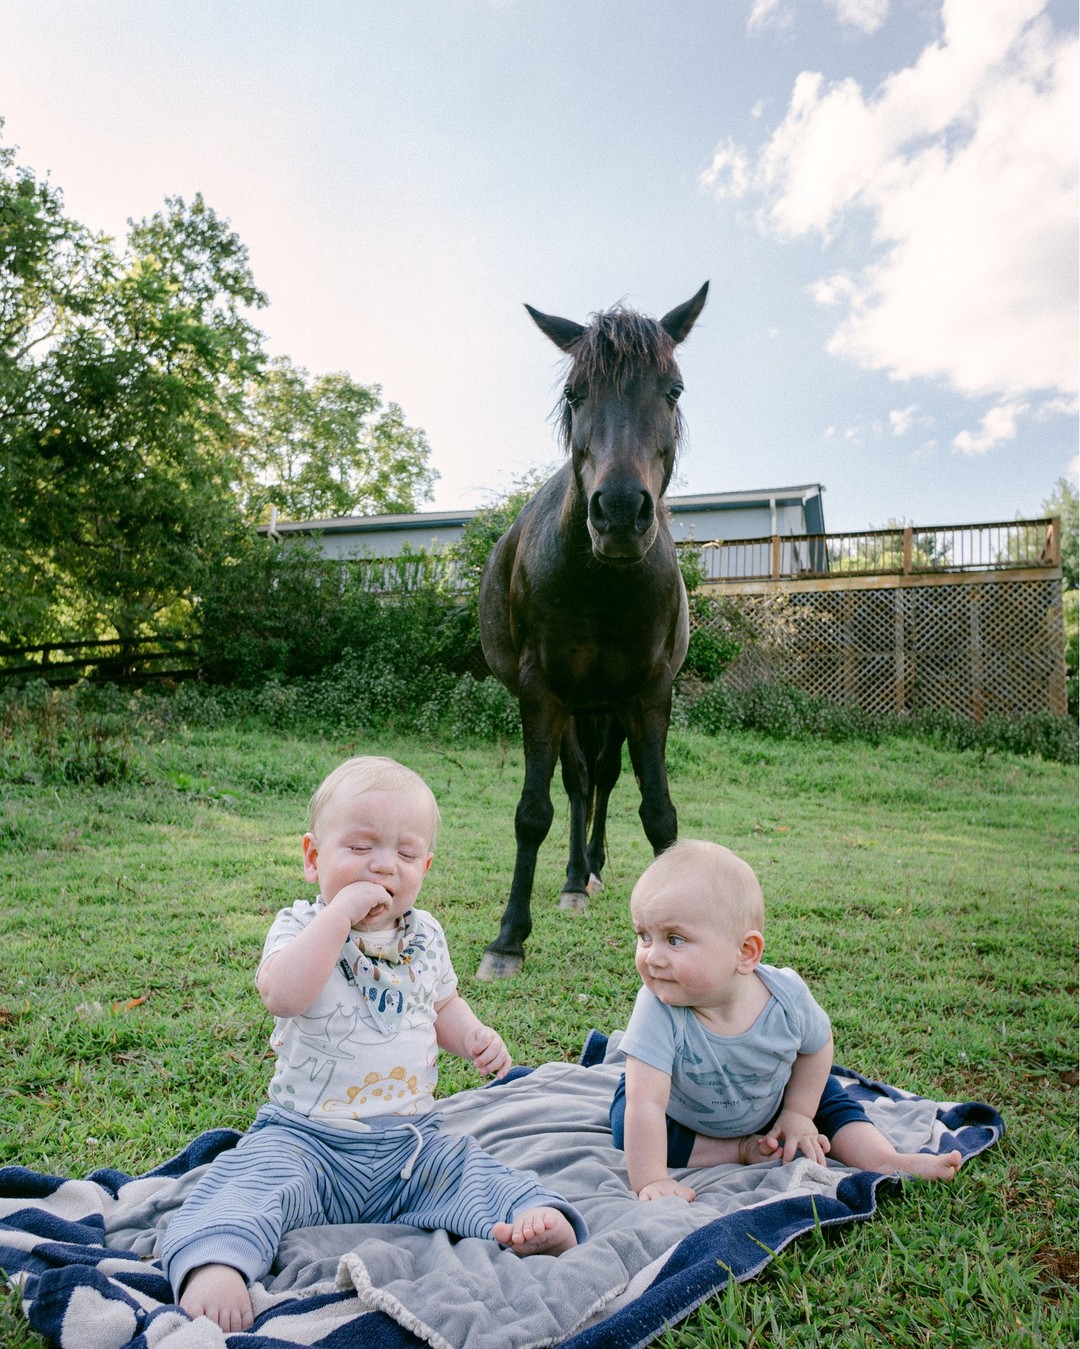 Formally introducing the boys to the pony. "Bewildered" would be a good description for everyone involved. Pony has only seen them in their stroller, so he was quite confused that they actually come out. I'm pretty sure he thought they were actually part of the stroller. Meanwhile, the boys were trying to figure out why I am making them sit in a field. Well boys, it's hard to carry two 20lb lumps at once.

Here's hoping these little boys grow up to be horsemen! Of course, knowing how guys are, they'll probably ride like three times and then be able to go to the Olympics. Has anyone else noticed how weirdly good guys are at riding?? If a guy takes riding seriously, they are pretty much experts almost immediately. Meanwhile, no matter how long I ride, I will always be at 2'6". Someone explain this to me. Just kidding, don't actually, I'm not ready to confront my own fear. I'm sure one of the boys can give me lessons in a few years.

#horselife #equestrian #horsemom #horsesofinstagram #ponylife #ponyrider #leadline #equestrianlife #countryside #countrylife #momlife